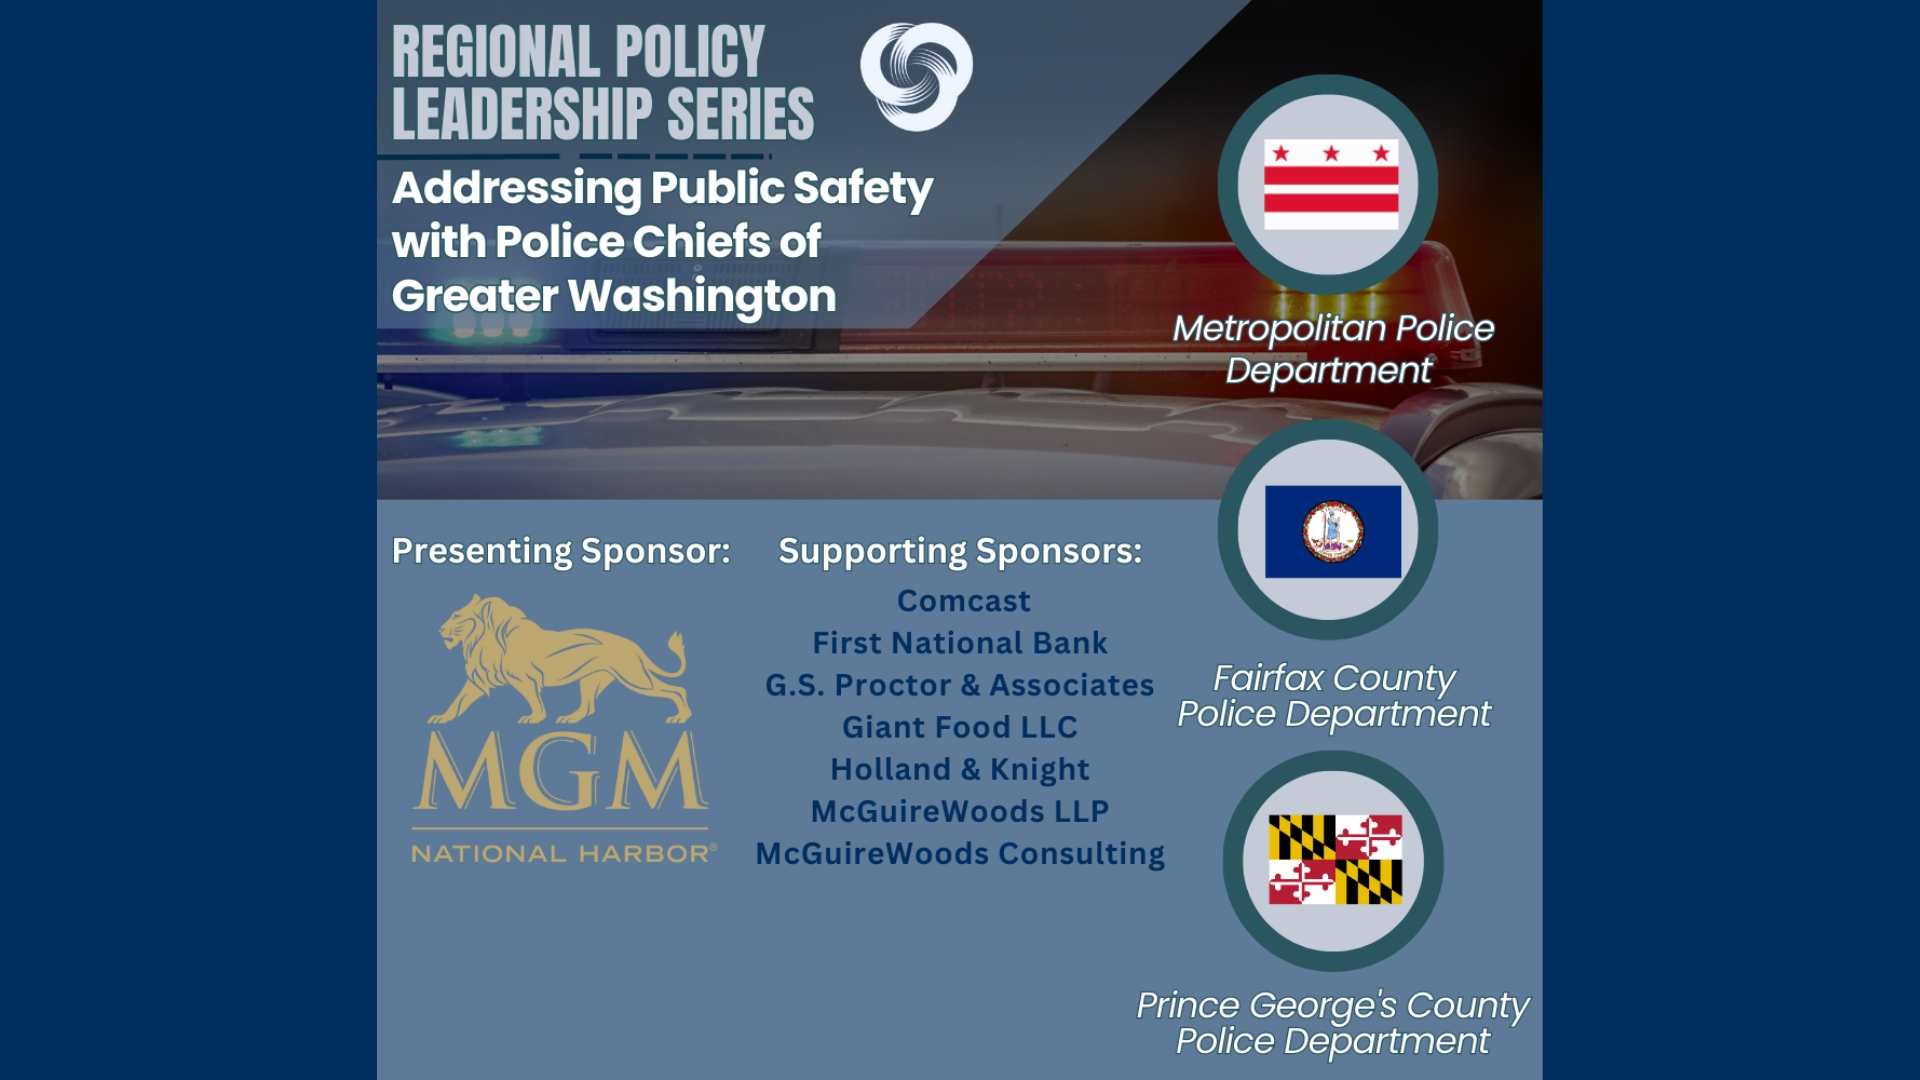 Police Chiefs of Greater Washington region join Regional Policy Leadership Series